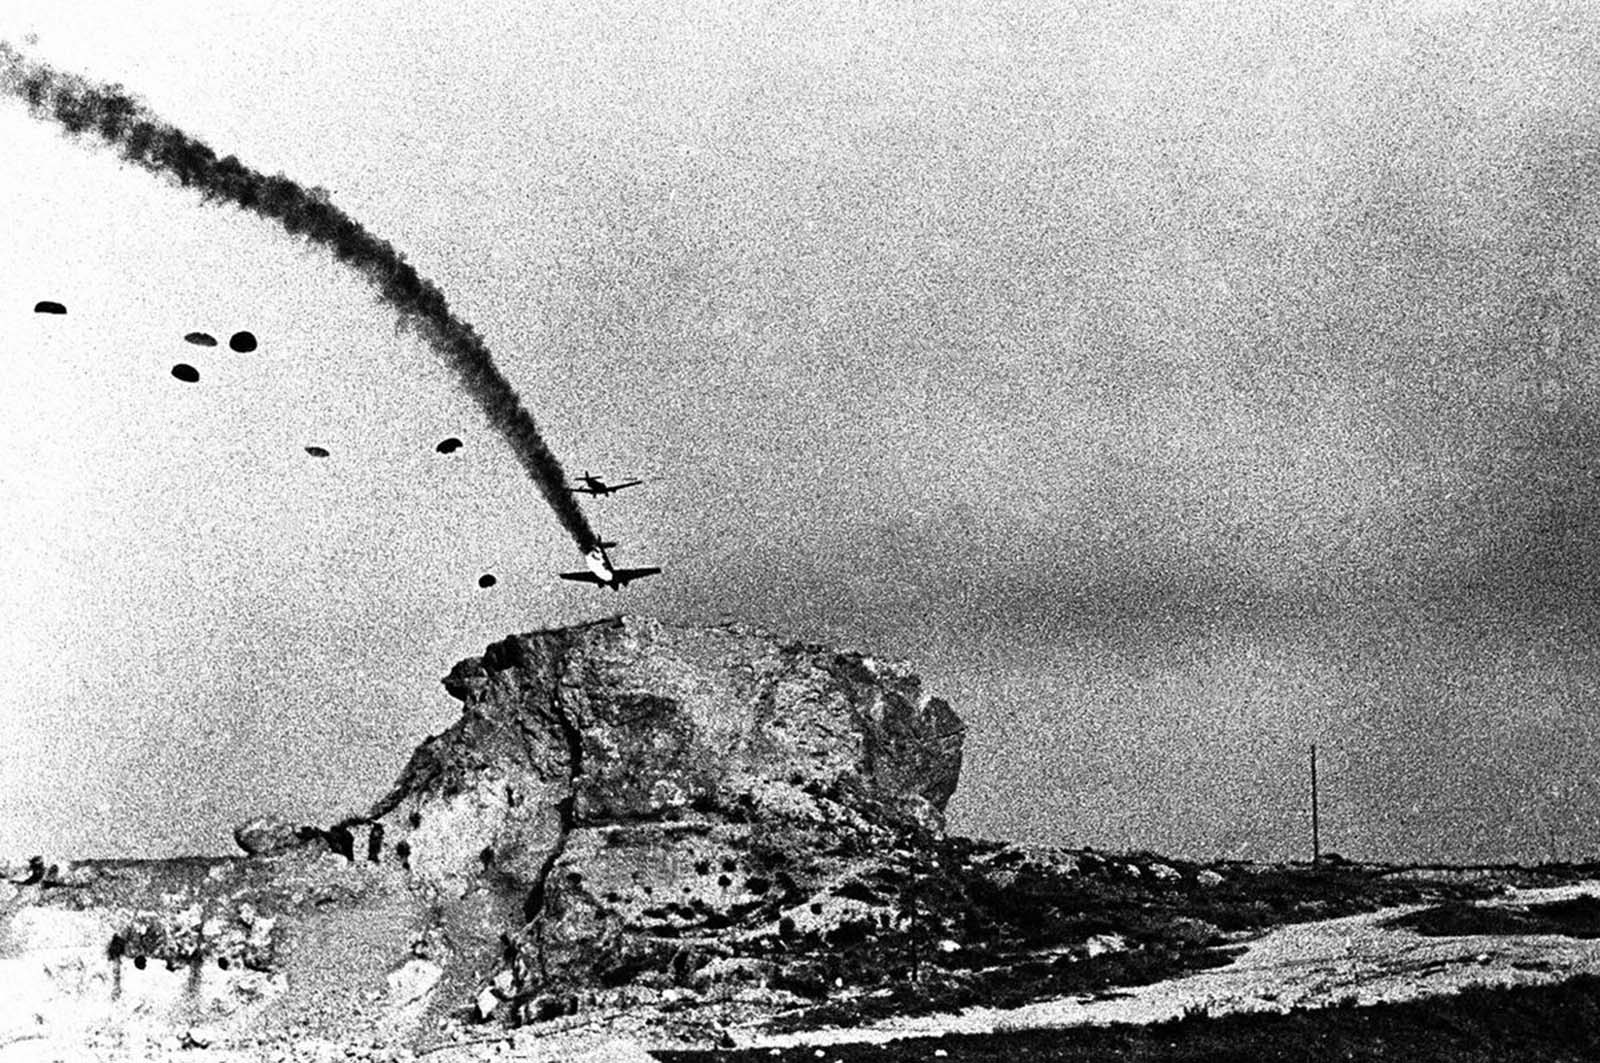 The price paid by German air invaders on the Greek island of Crete. While fighter aircraft patrolled the area, troop-carrying aircraft followed, escorted by bombers. Here, a paratroop aircraft crashes to the ground on June 16, 1941.